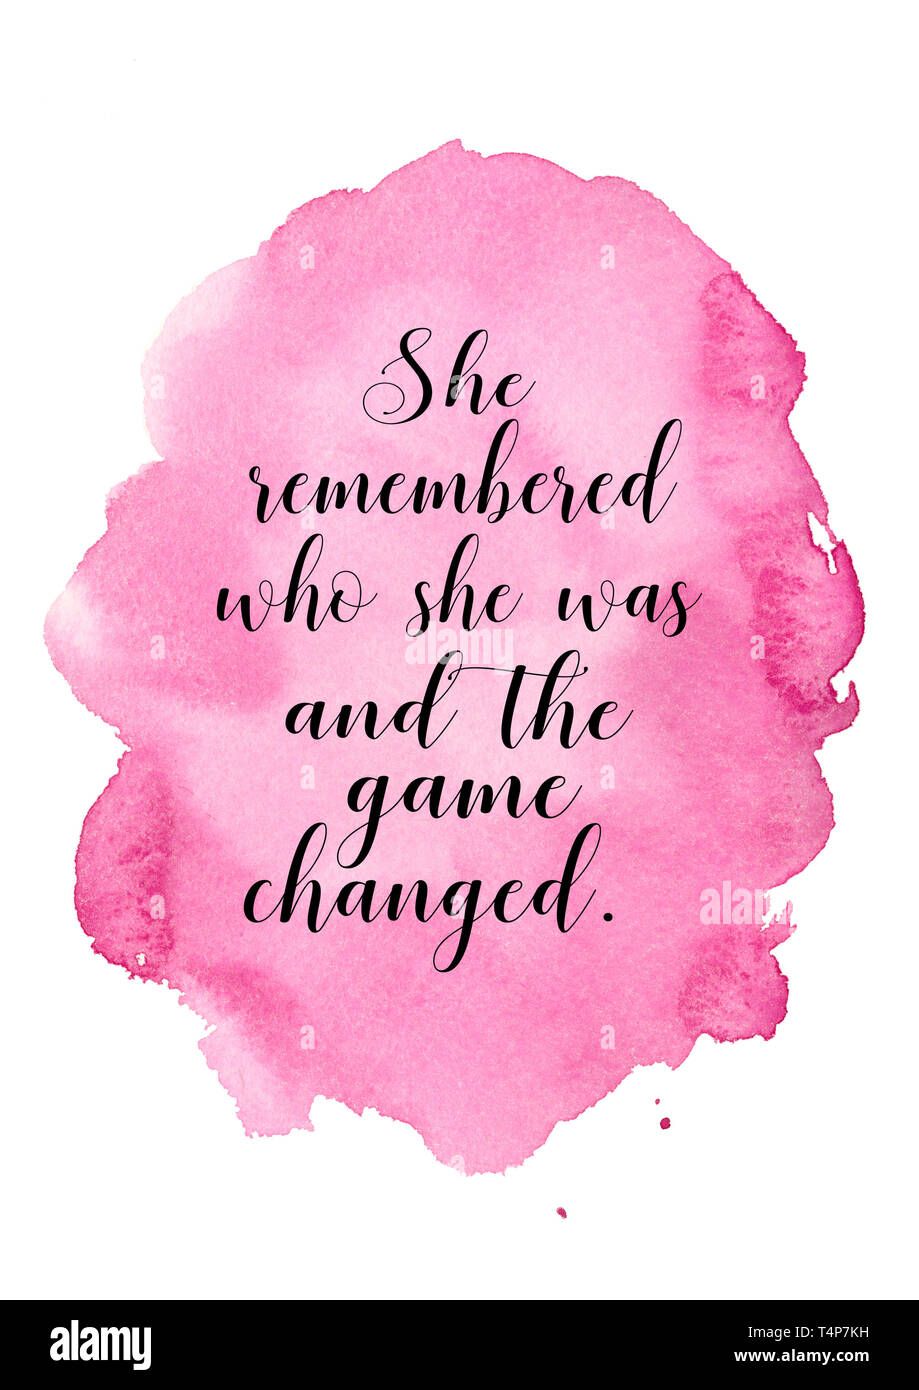 She remembered who she was and the game changed. Girly quote with pink watercolor background Stock Photo